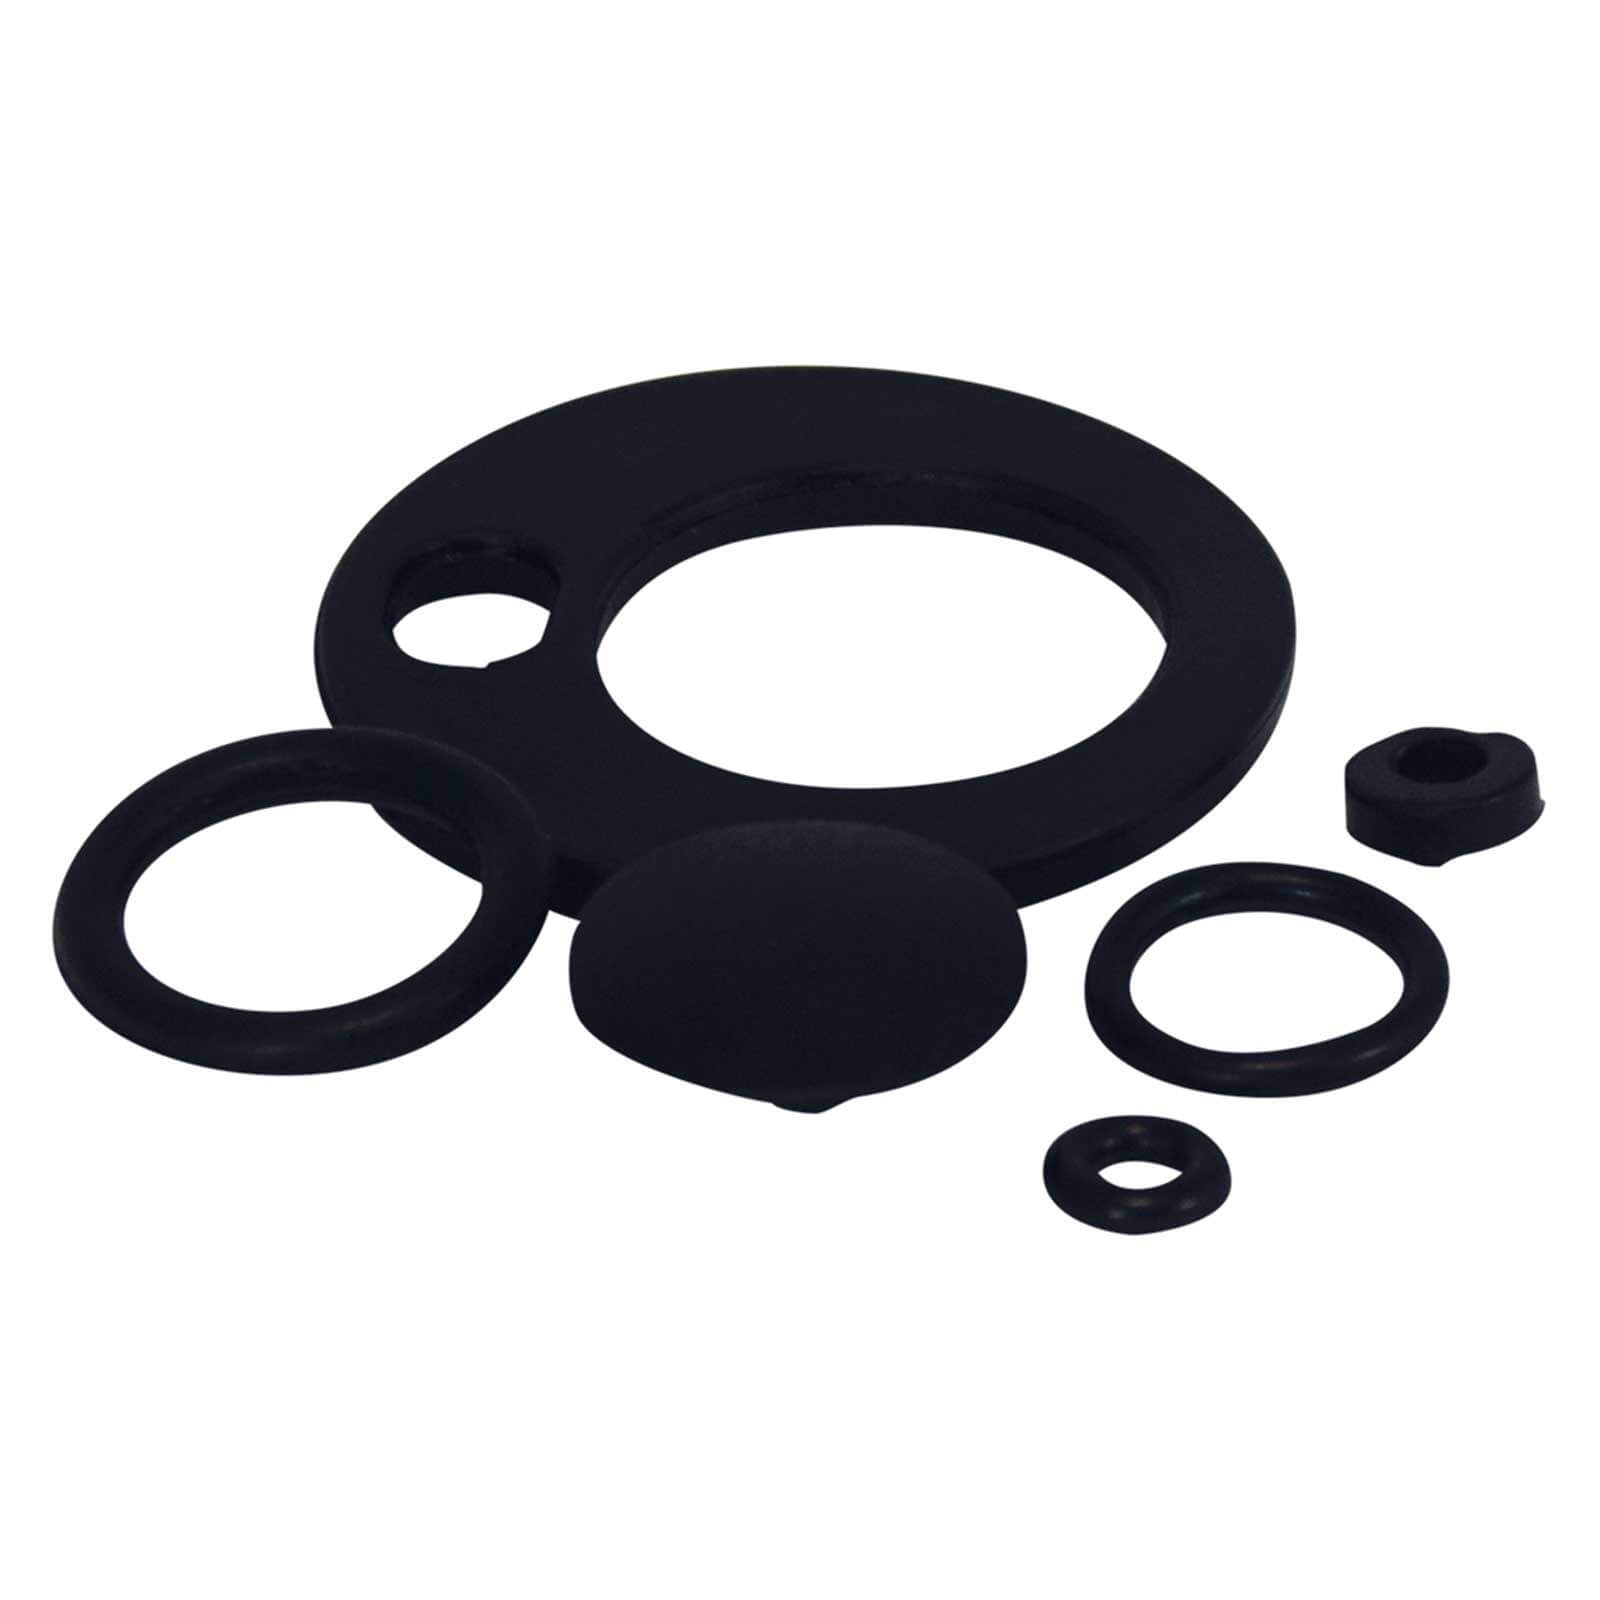 Image of Spear and Jackson Replacement O Rings for 2l Pump Action Pressure Sprayers